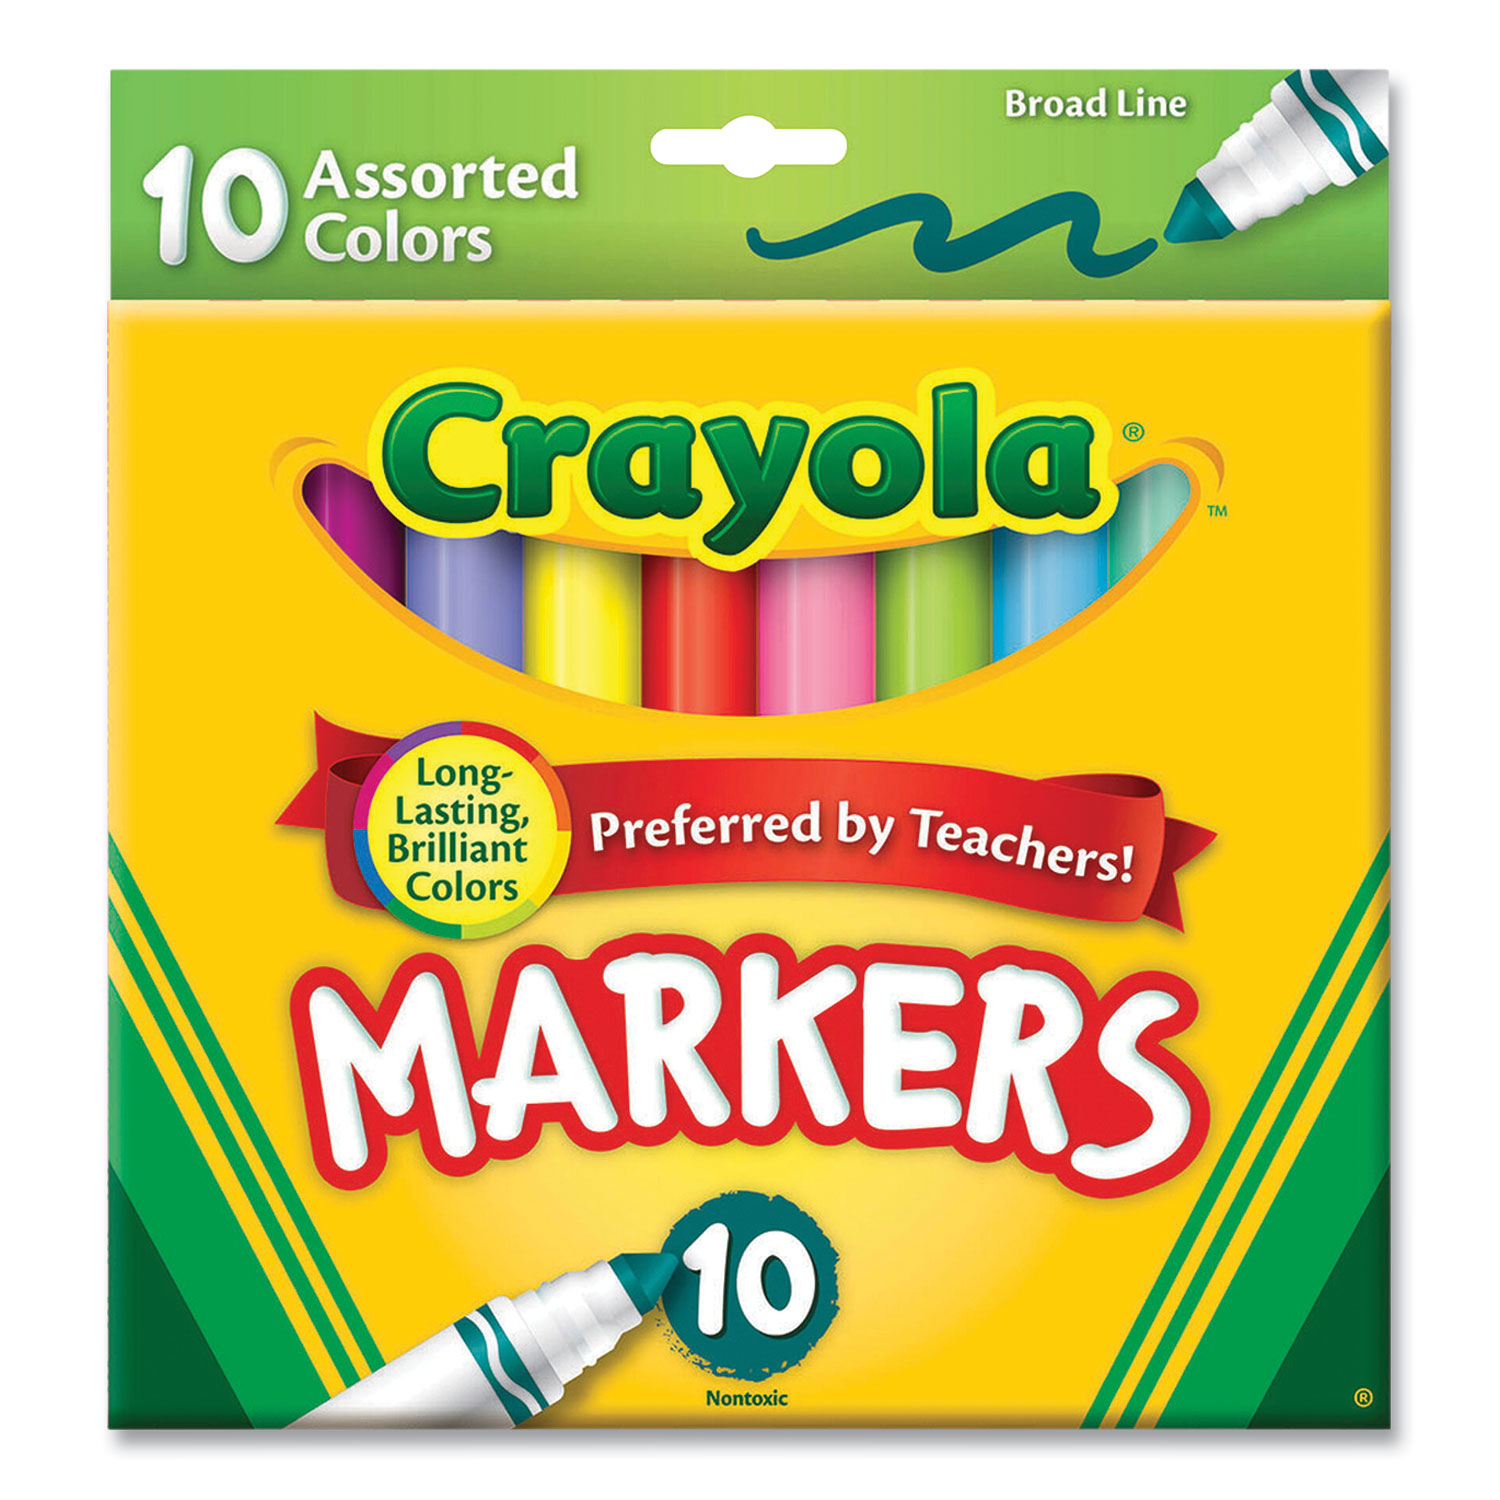 Crayola® Non-Washable Marker, Broad Bullet Tip, Assorted Tropical Colors, 10/Pack